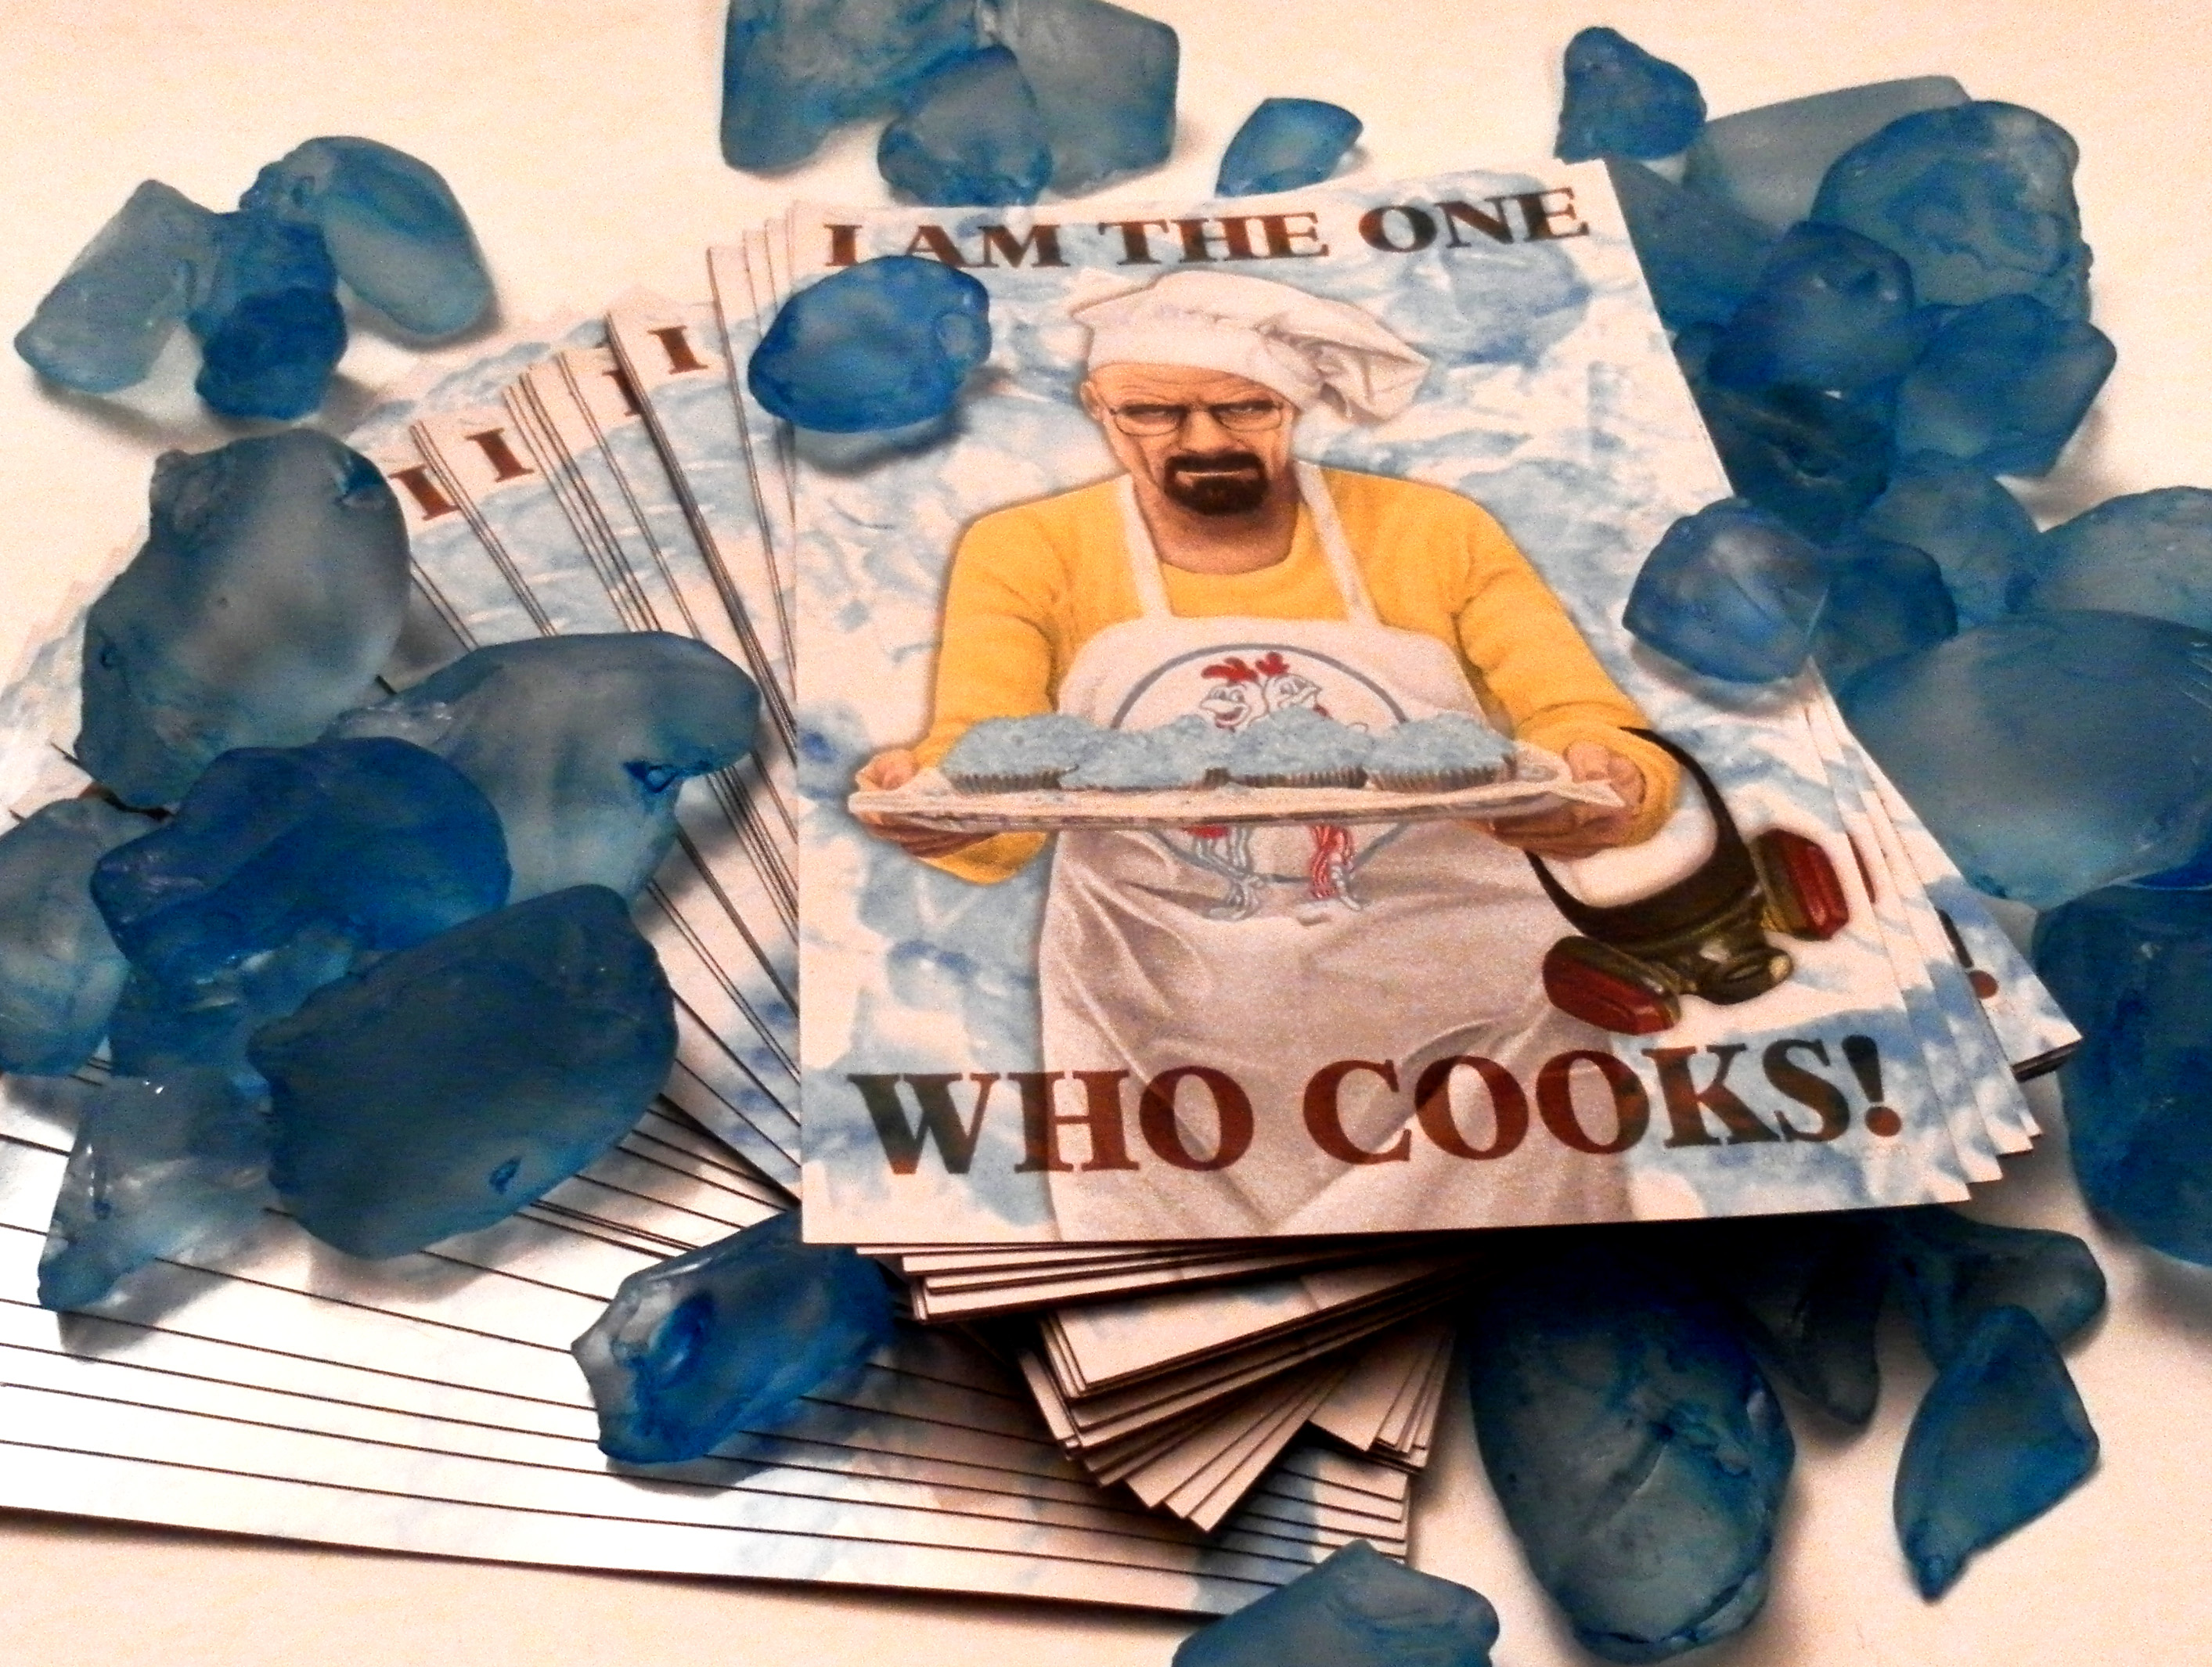 https:www.etsy.comlisting164892285breaking-bad-magnet-i-am-the-one-who?